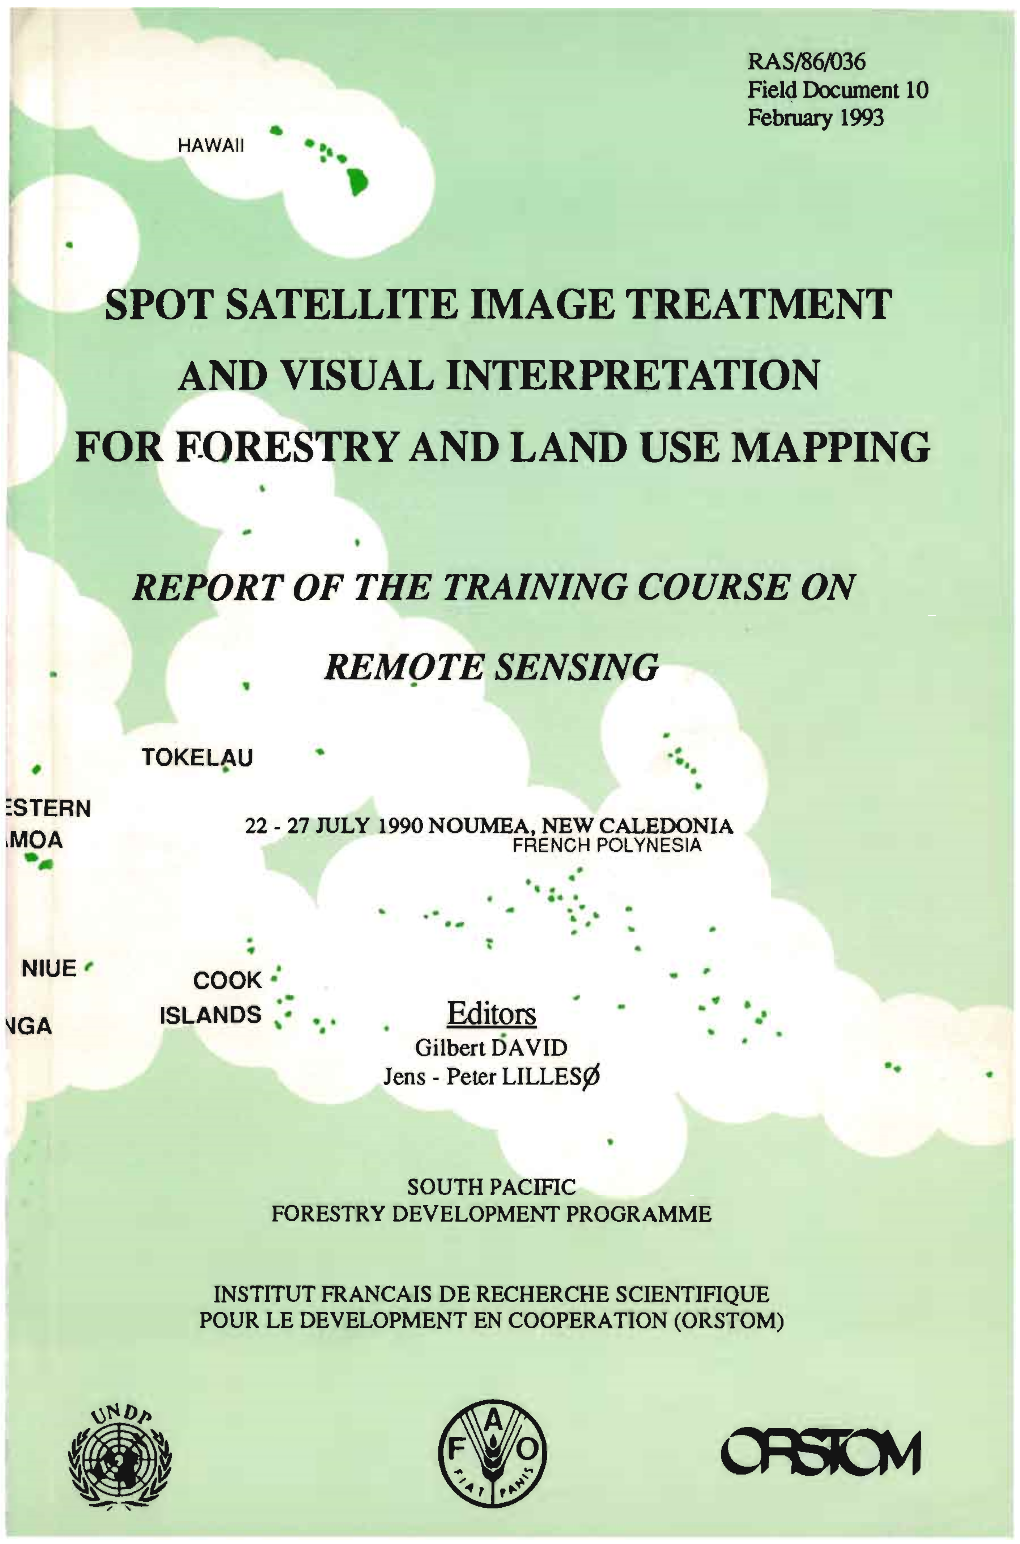 Spot Satellite Image Treatment and Visual Interpretation for Forestry and Land Use Mapping